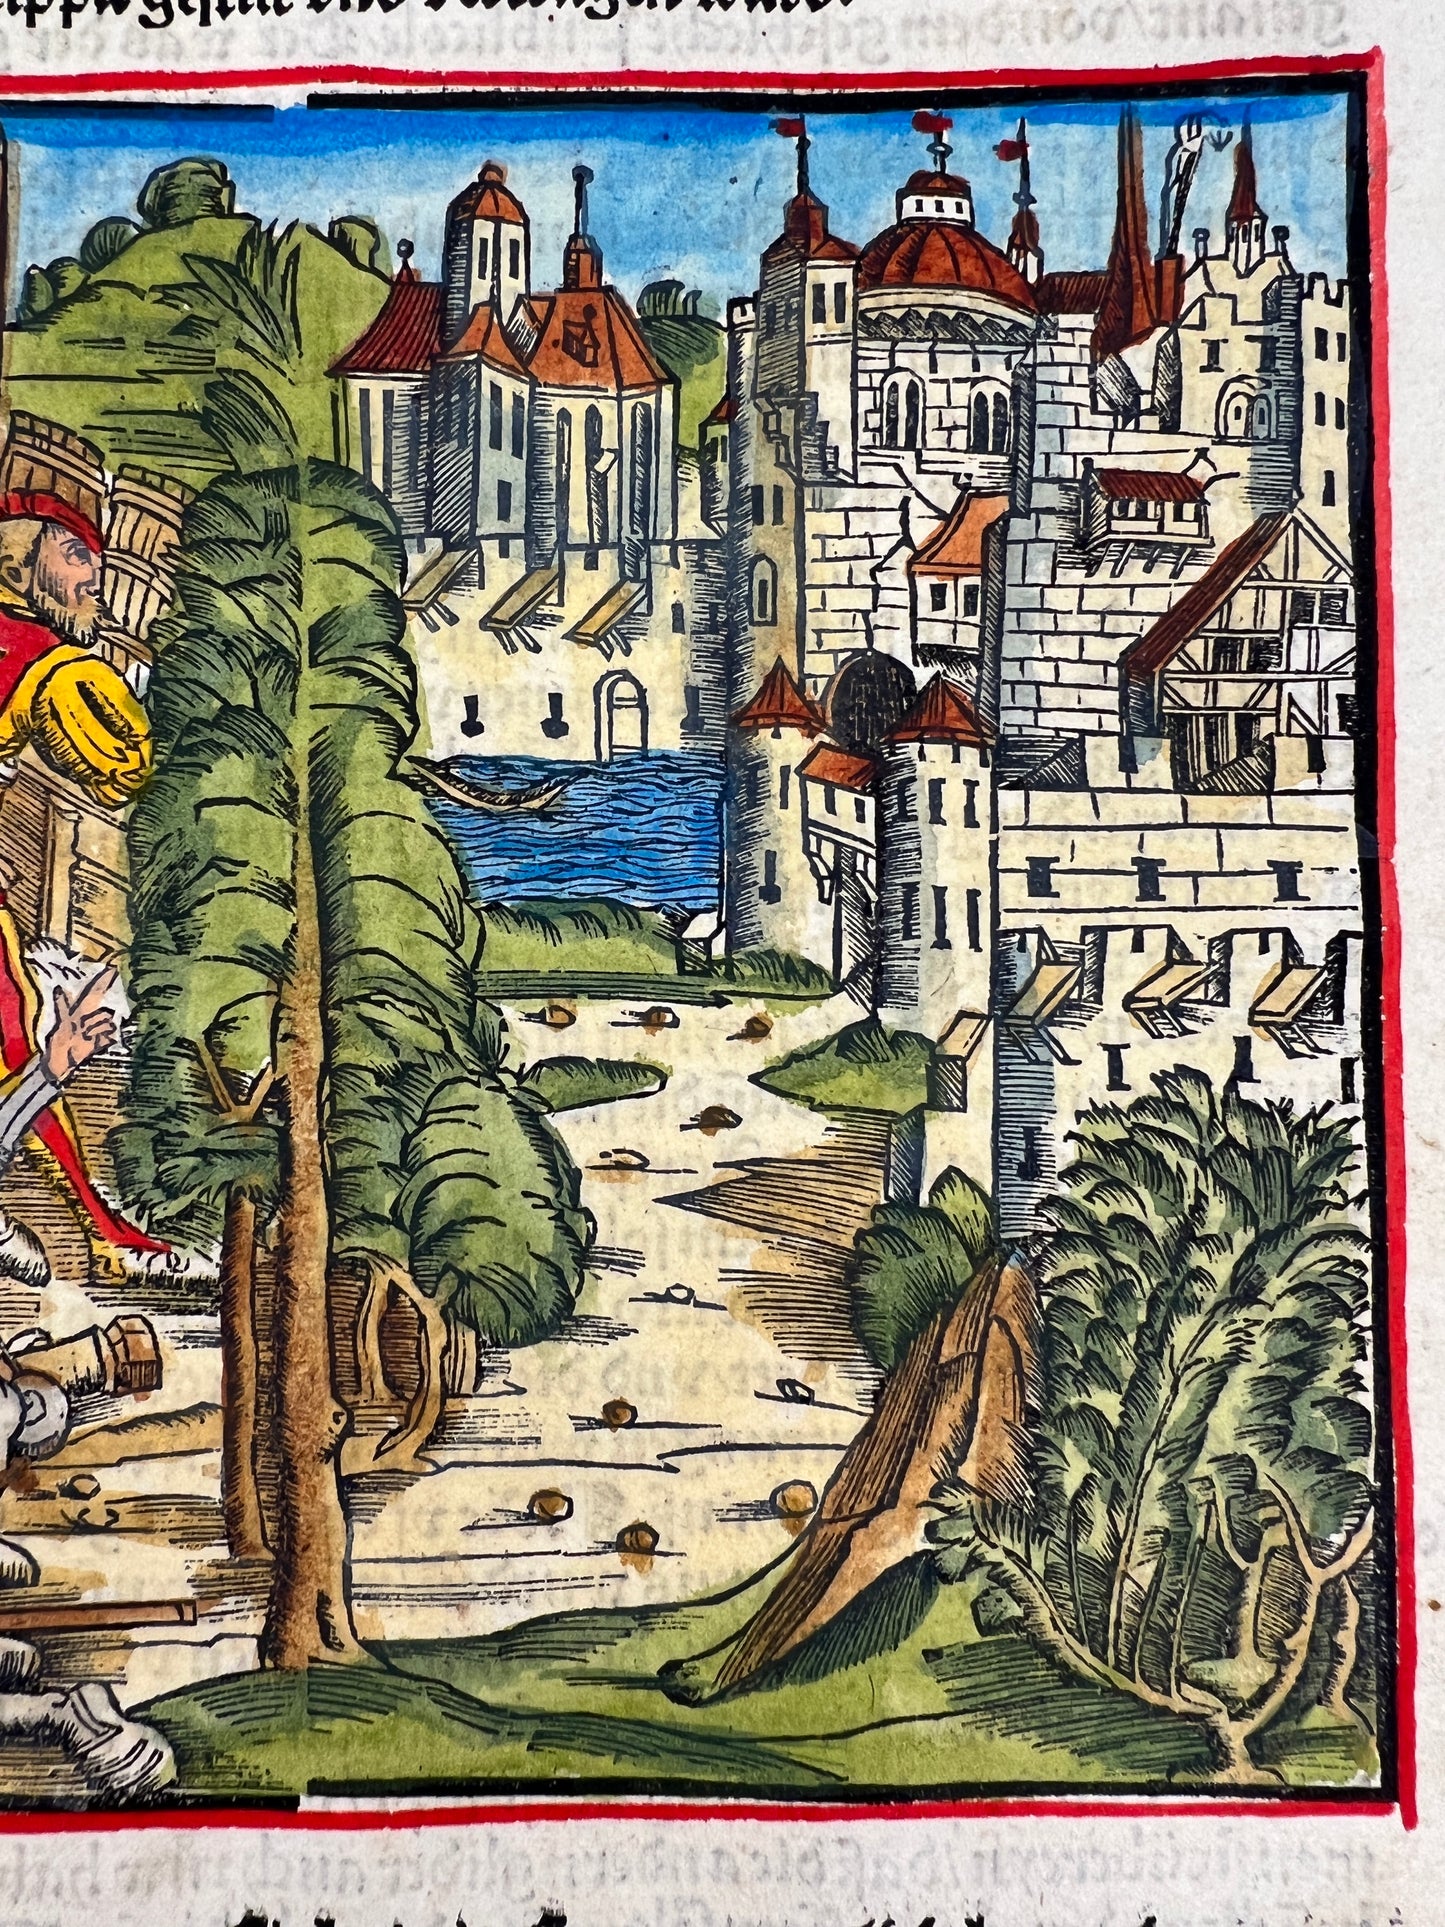 1514 Leaf with Woodcut - Livy's History of Rome: Siege of Rome Battle Scene